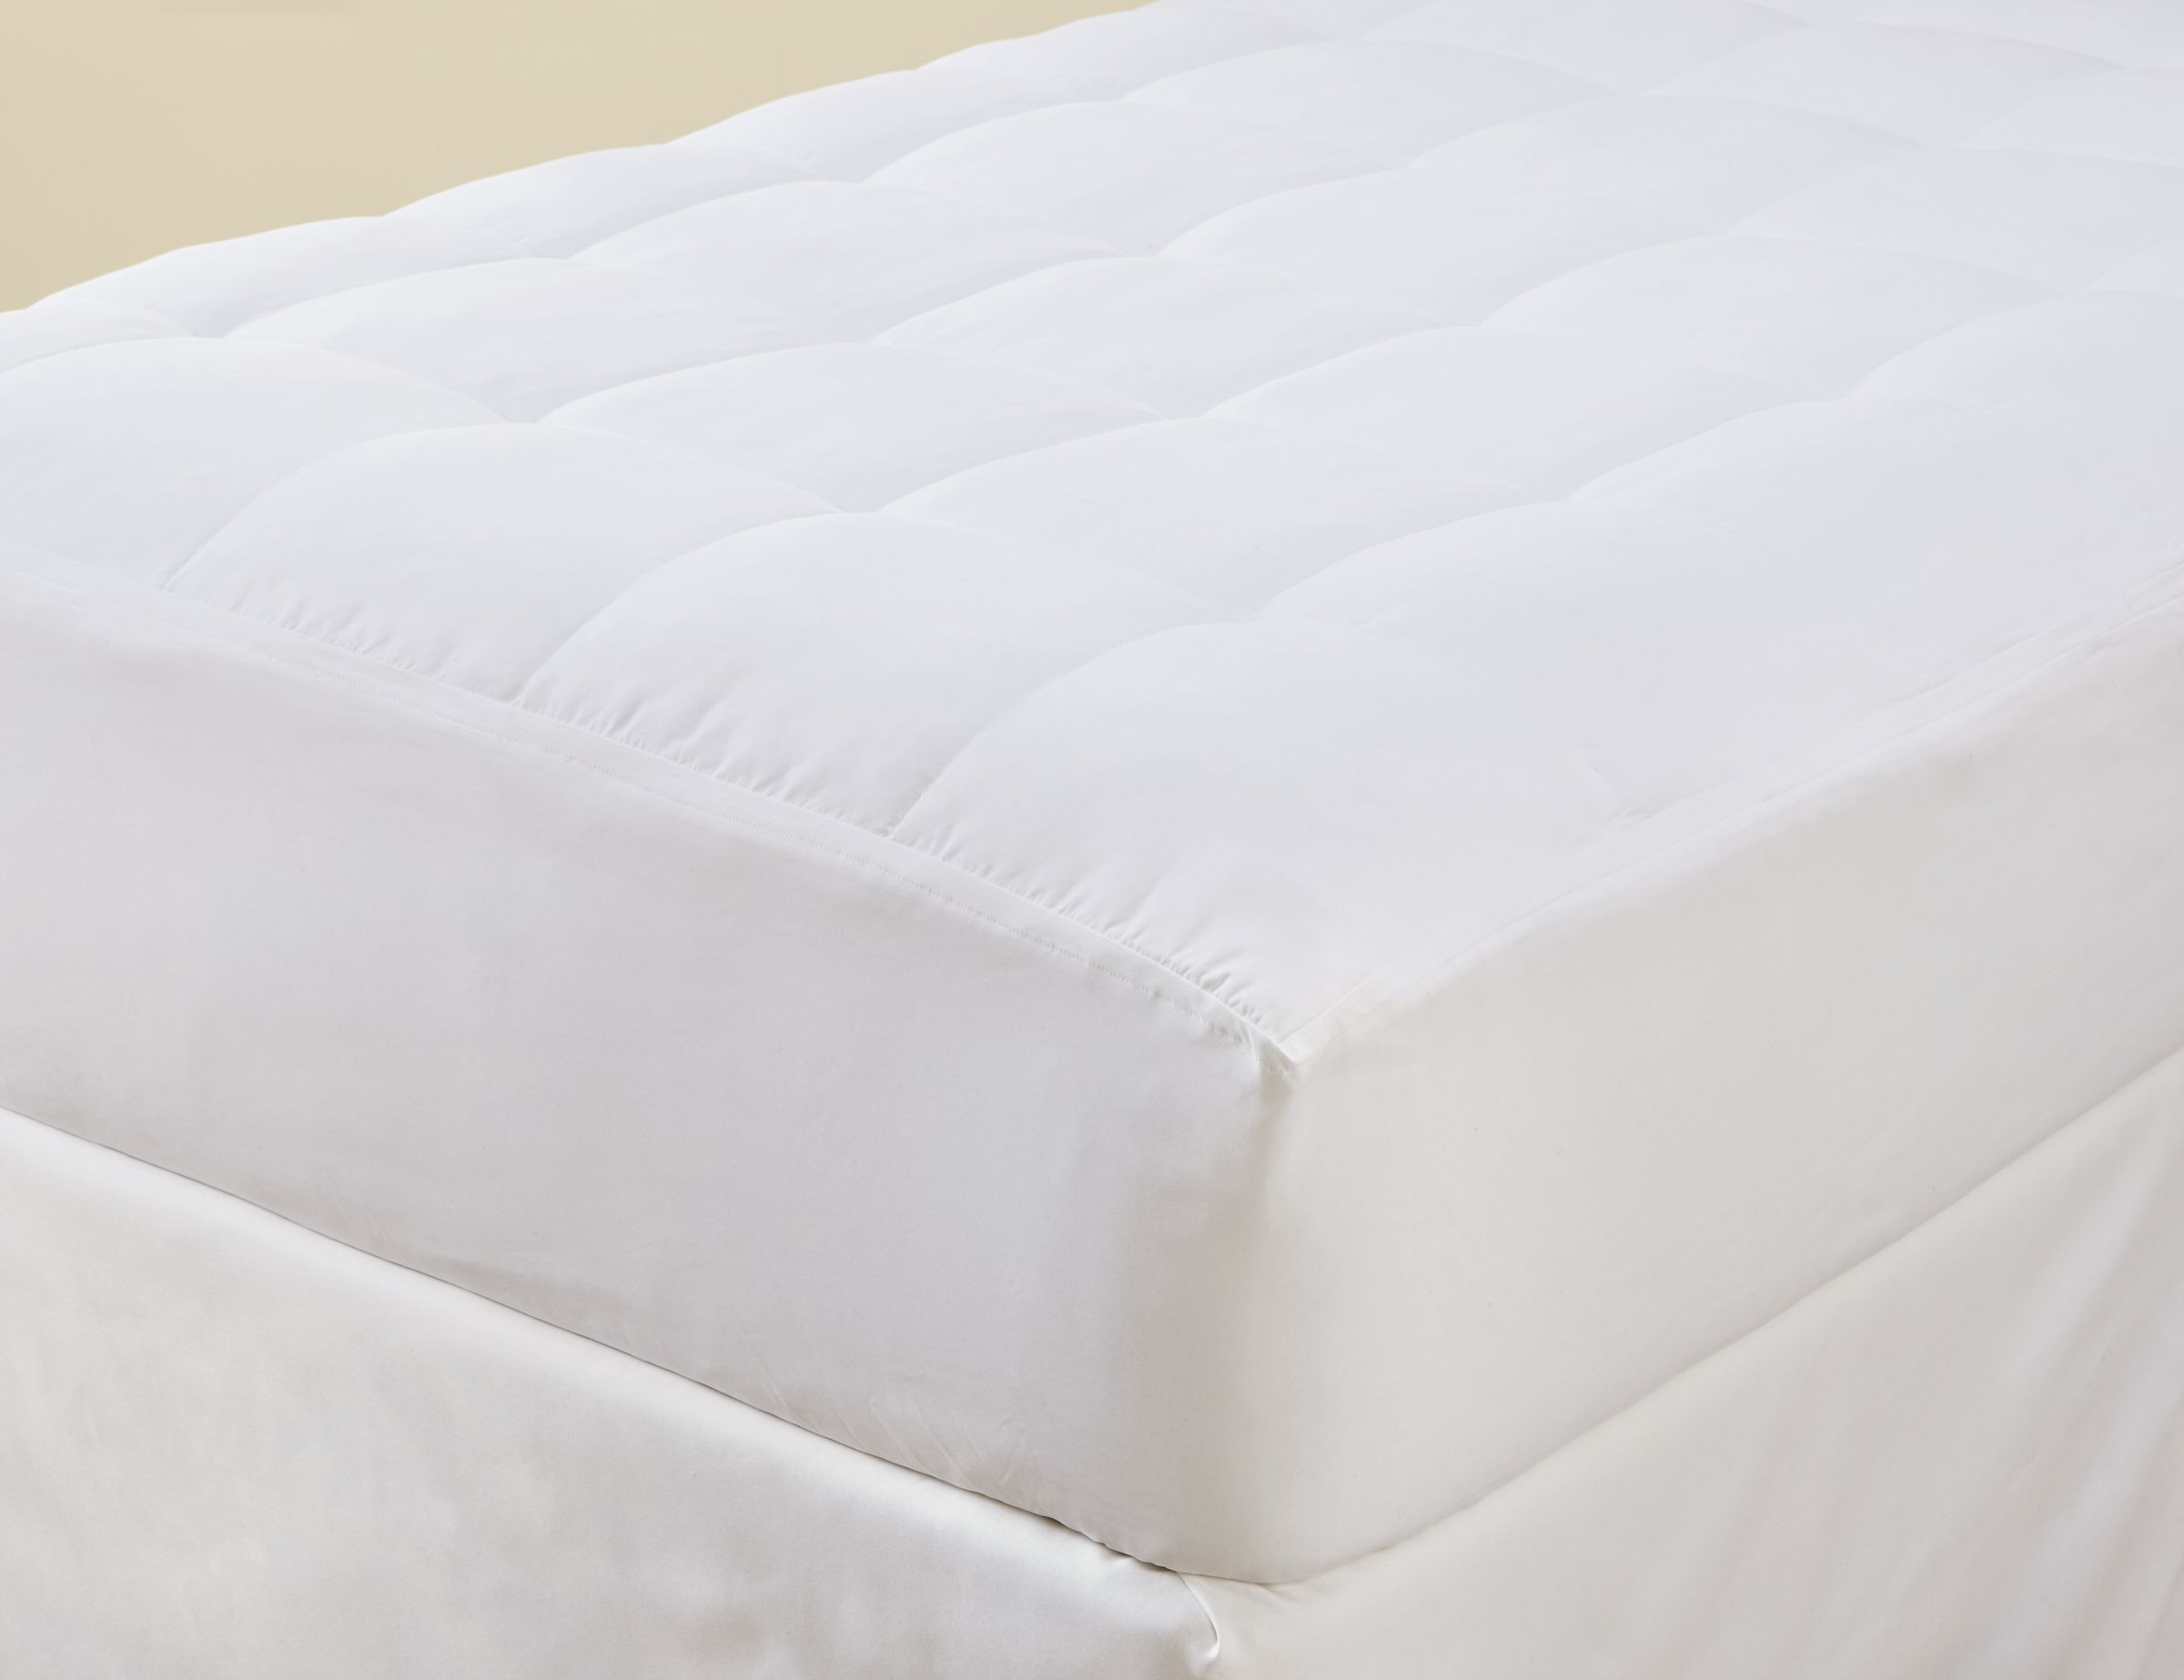 cannon ultimate protection waterproof mattress pad